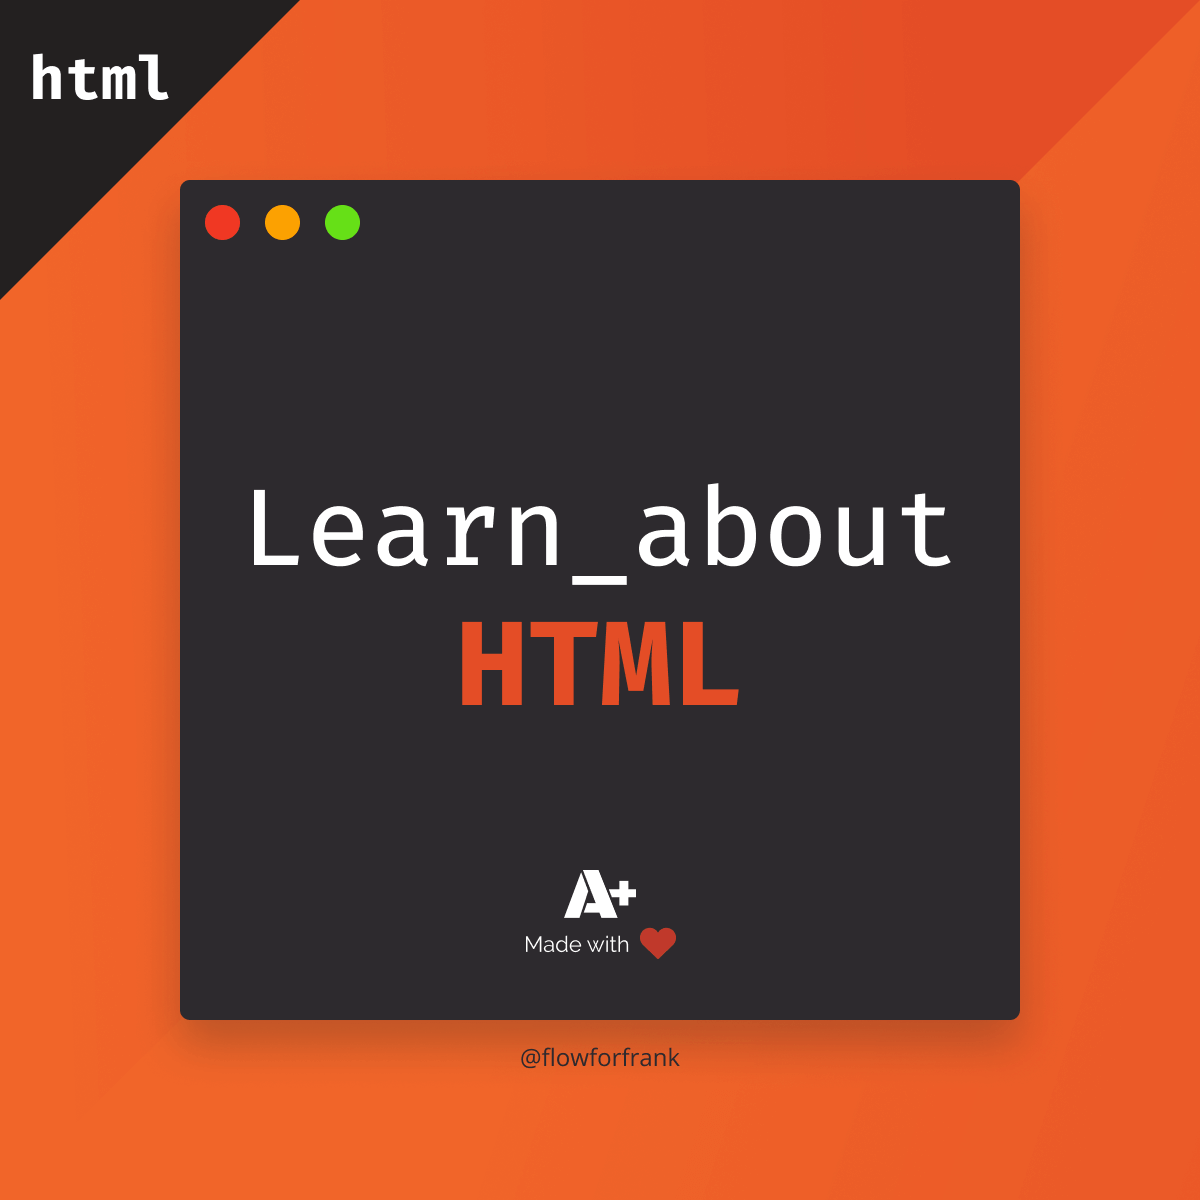 Learn about HTML